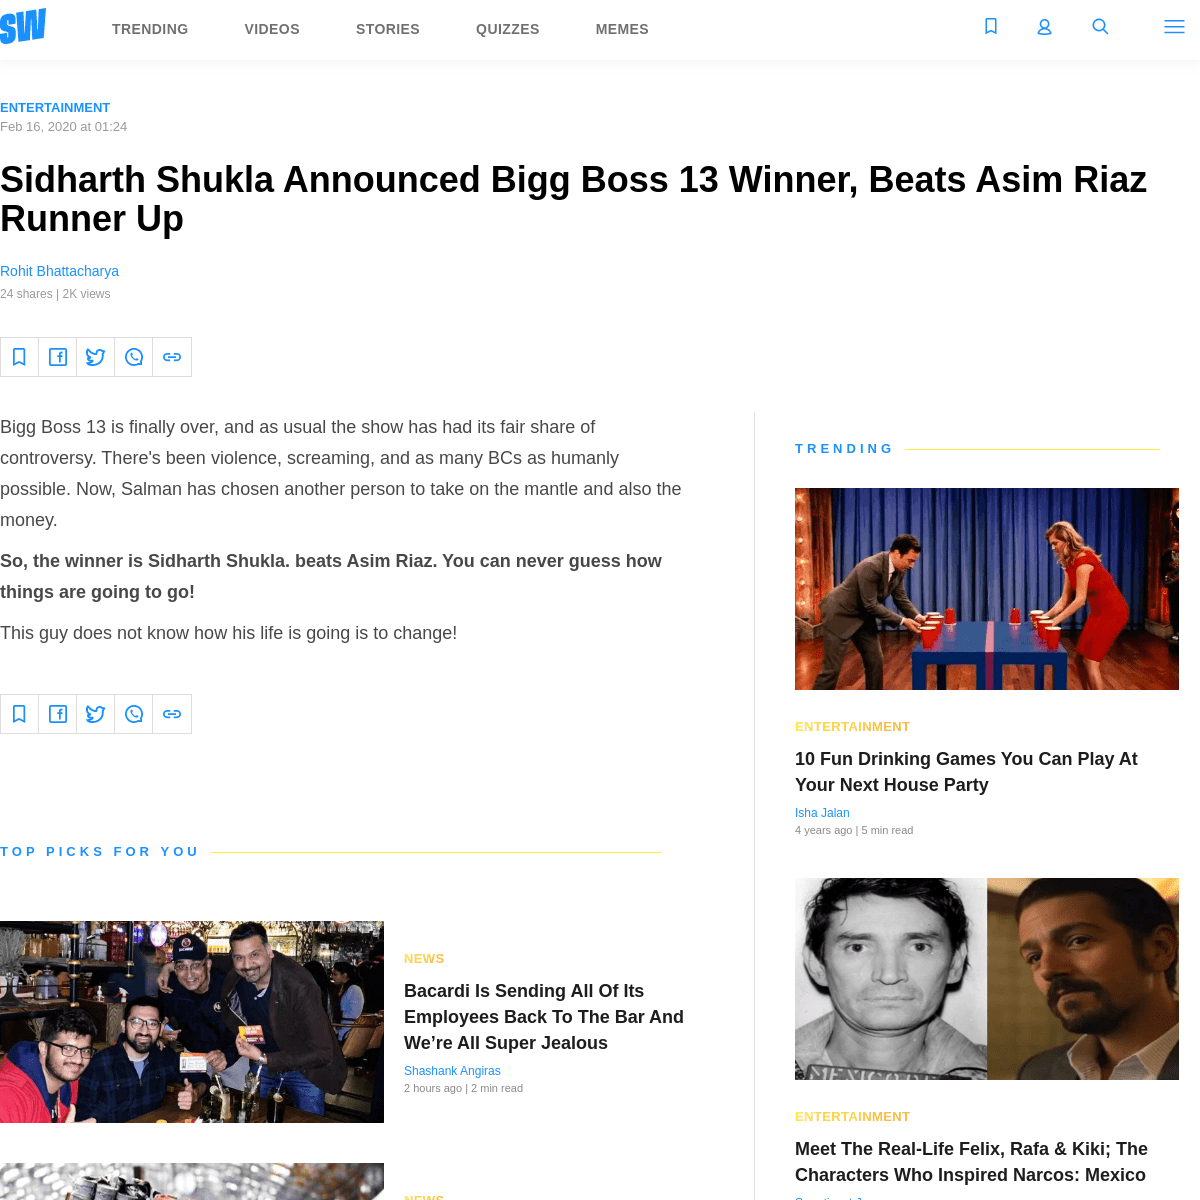 A complete backup of www.scoopwhoop.com/entertainment/sidharth-shukla-bigg-boss-13-winner/